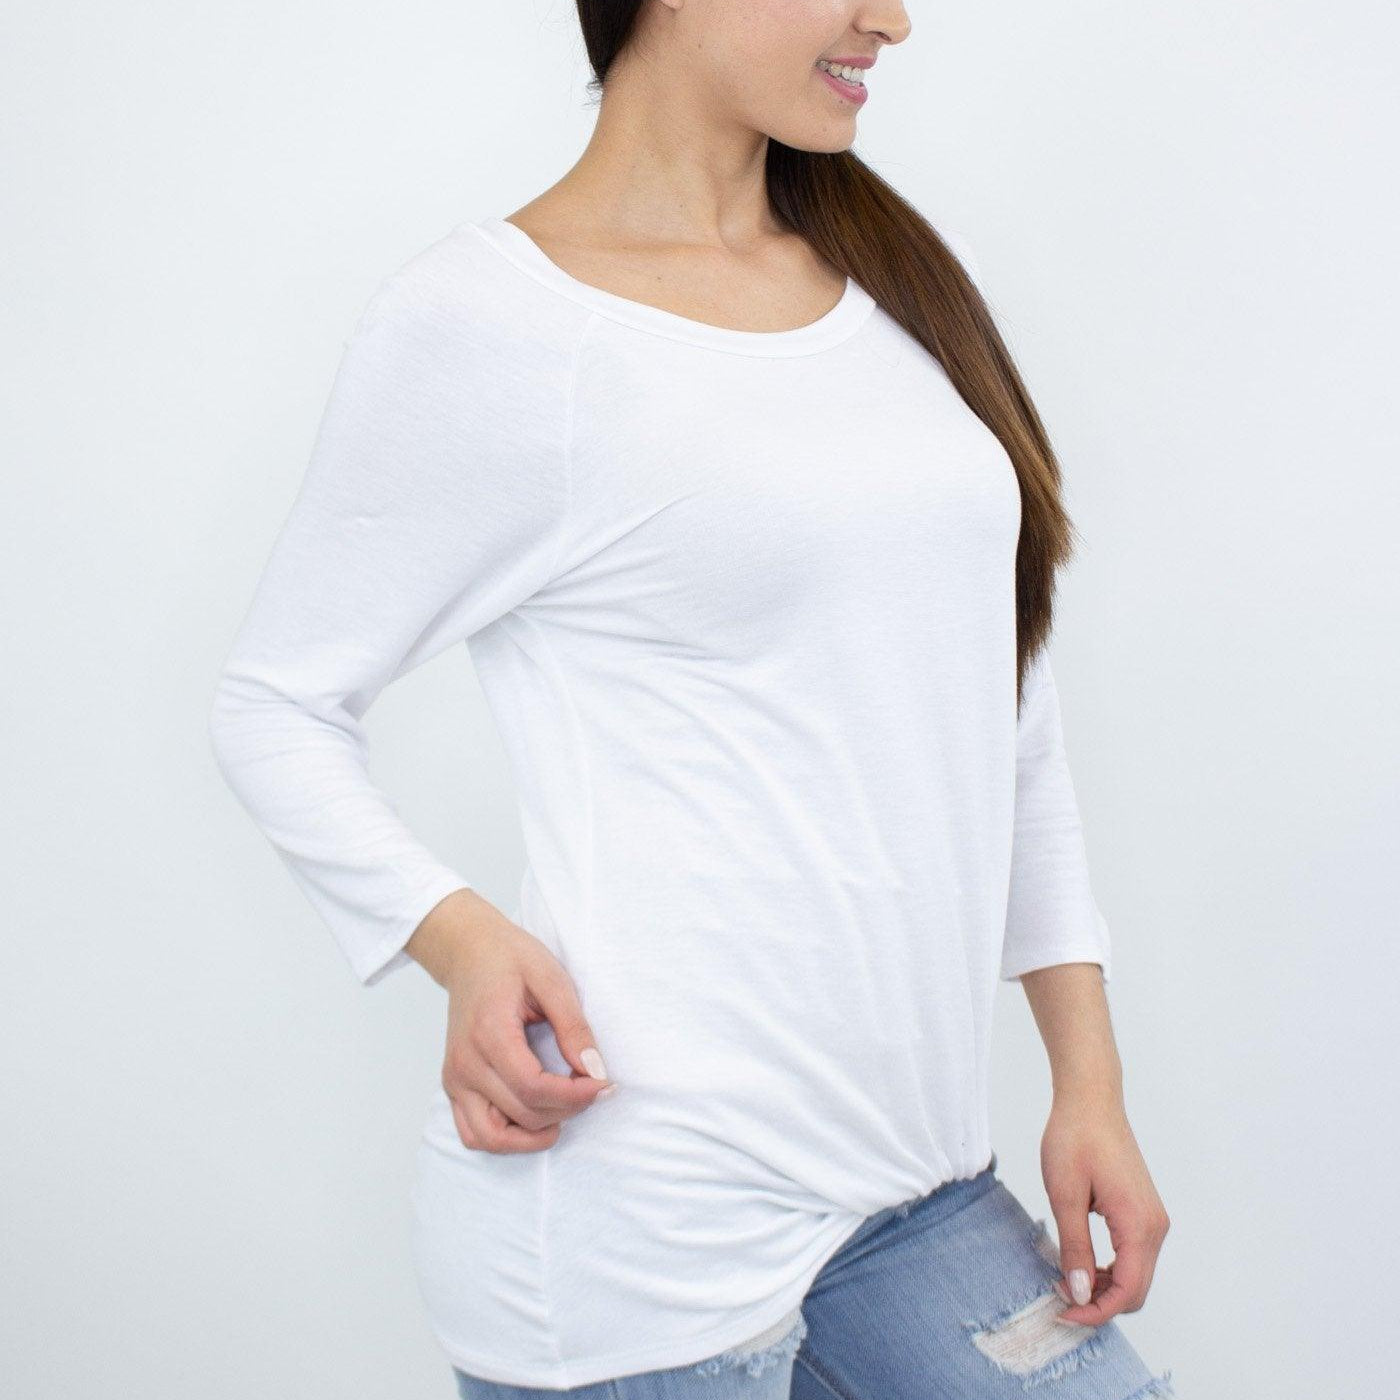 Women's Shirts Twisted Front Comfortable Top - White